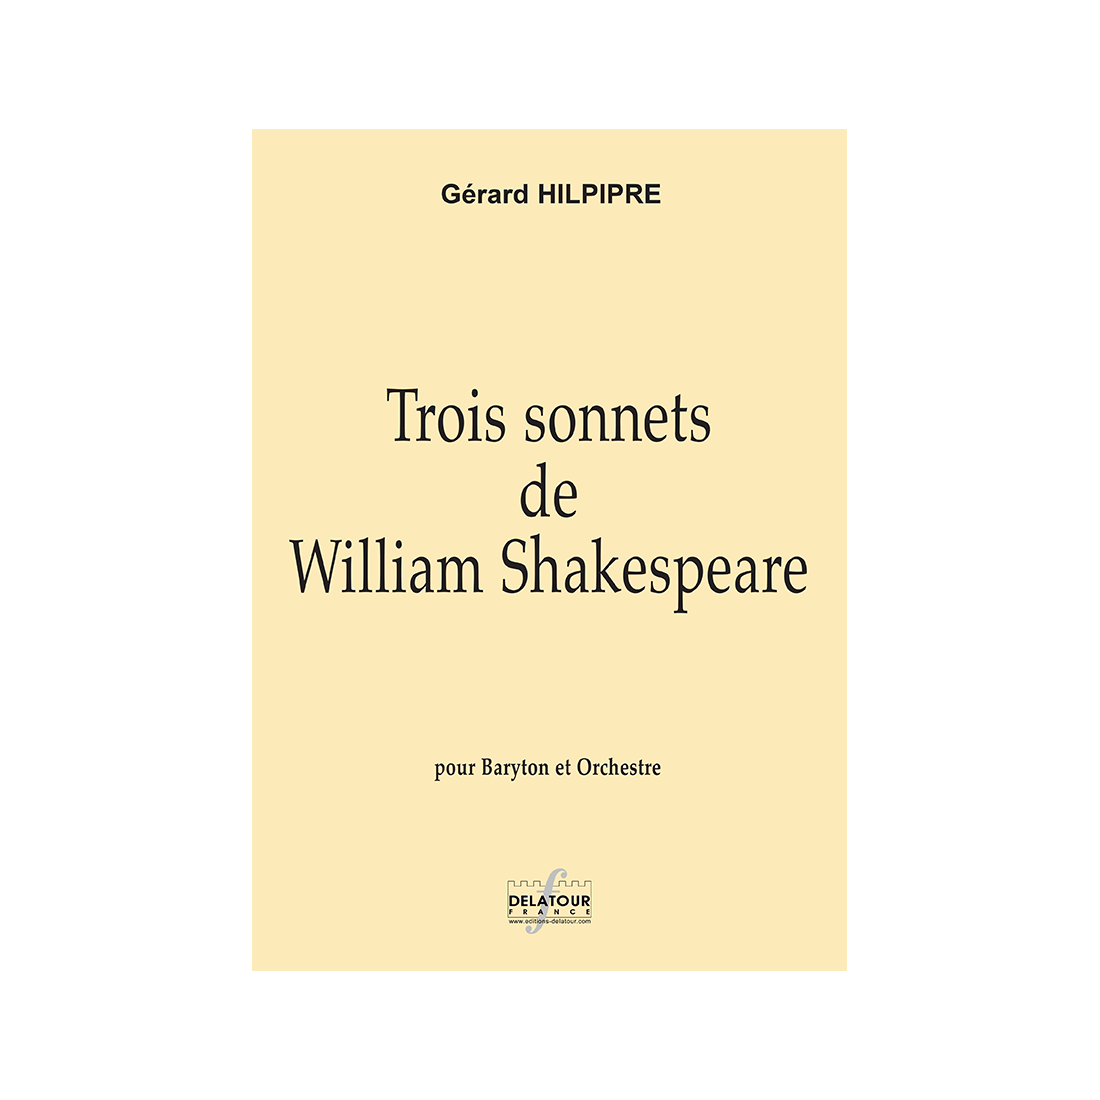 Three sonnets of William Shakespeare for baritone and orchestra (FULL SCORE)